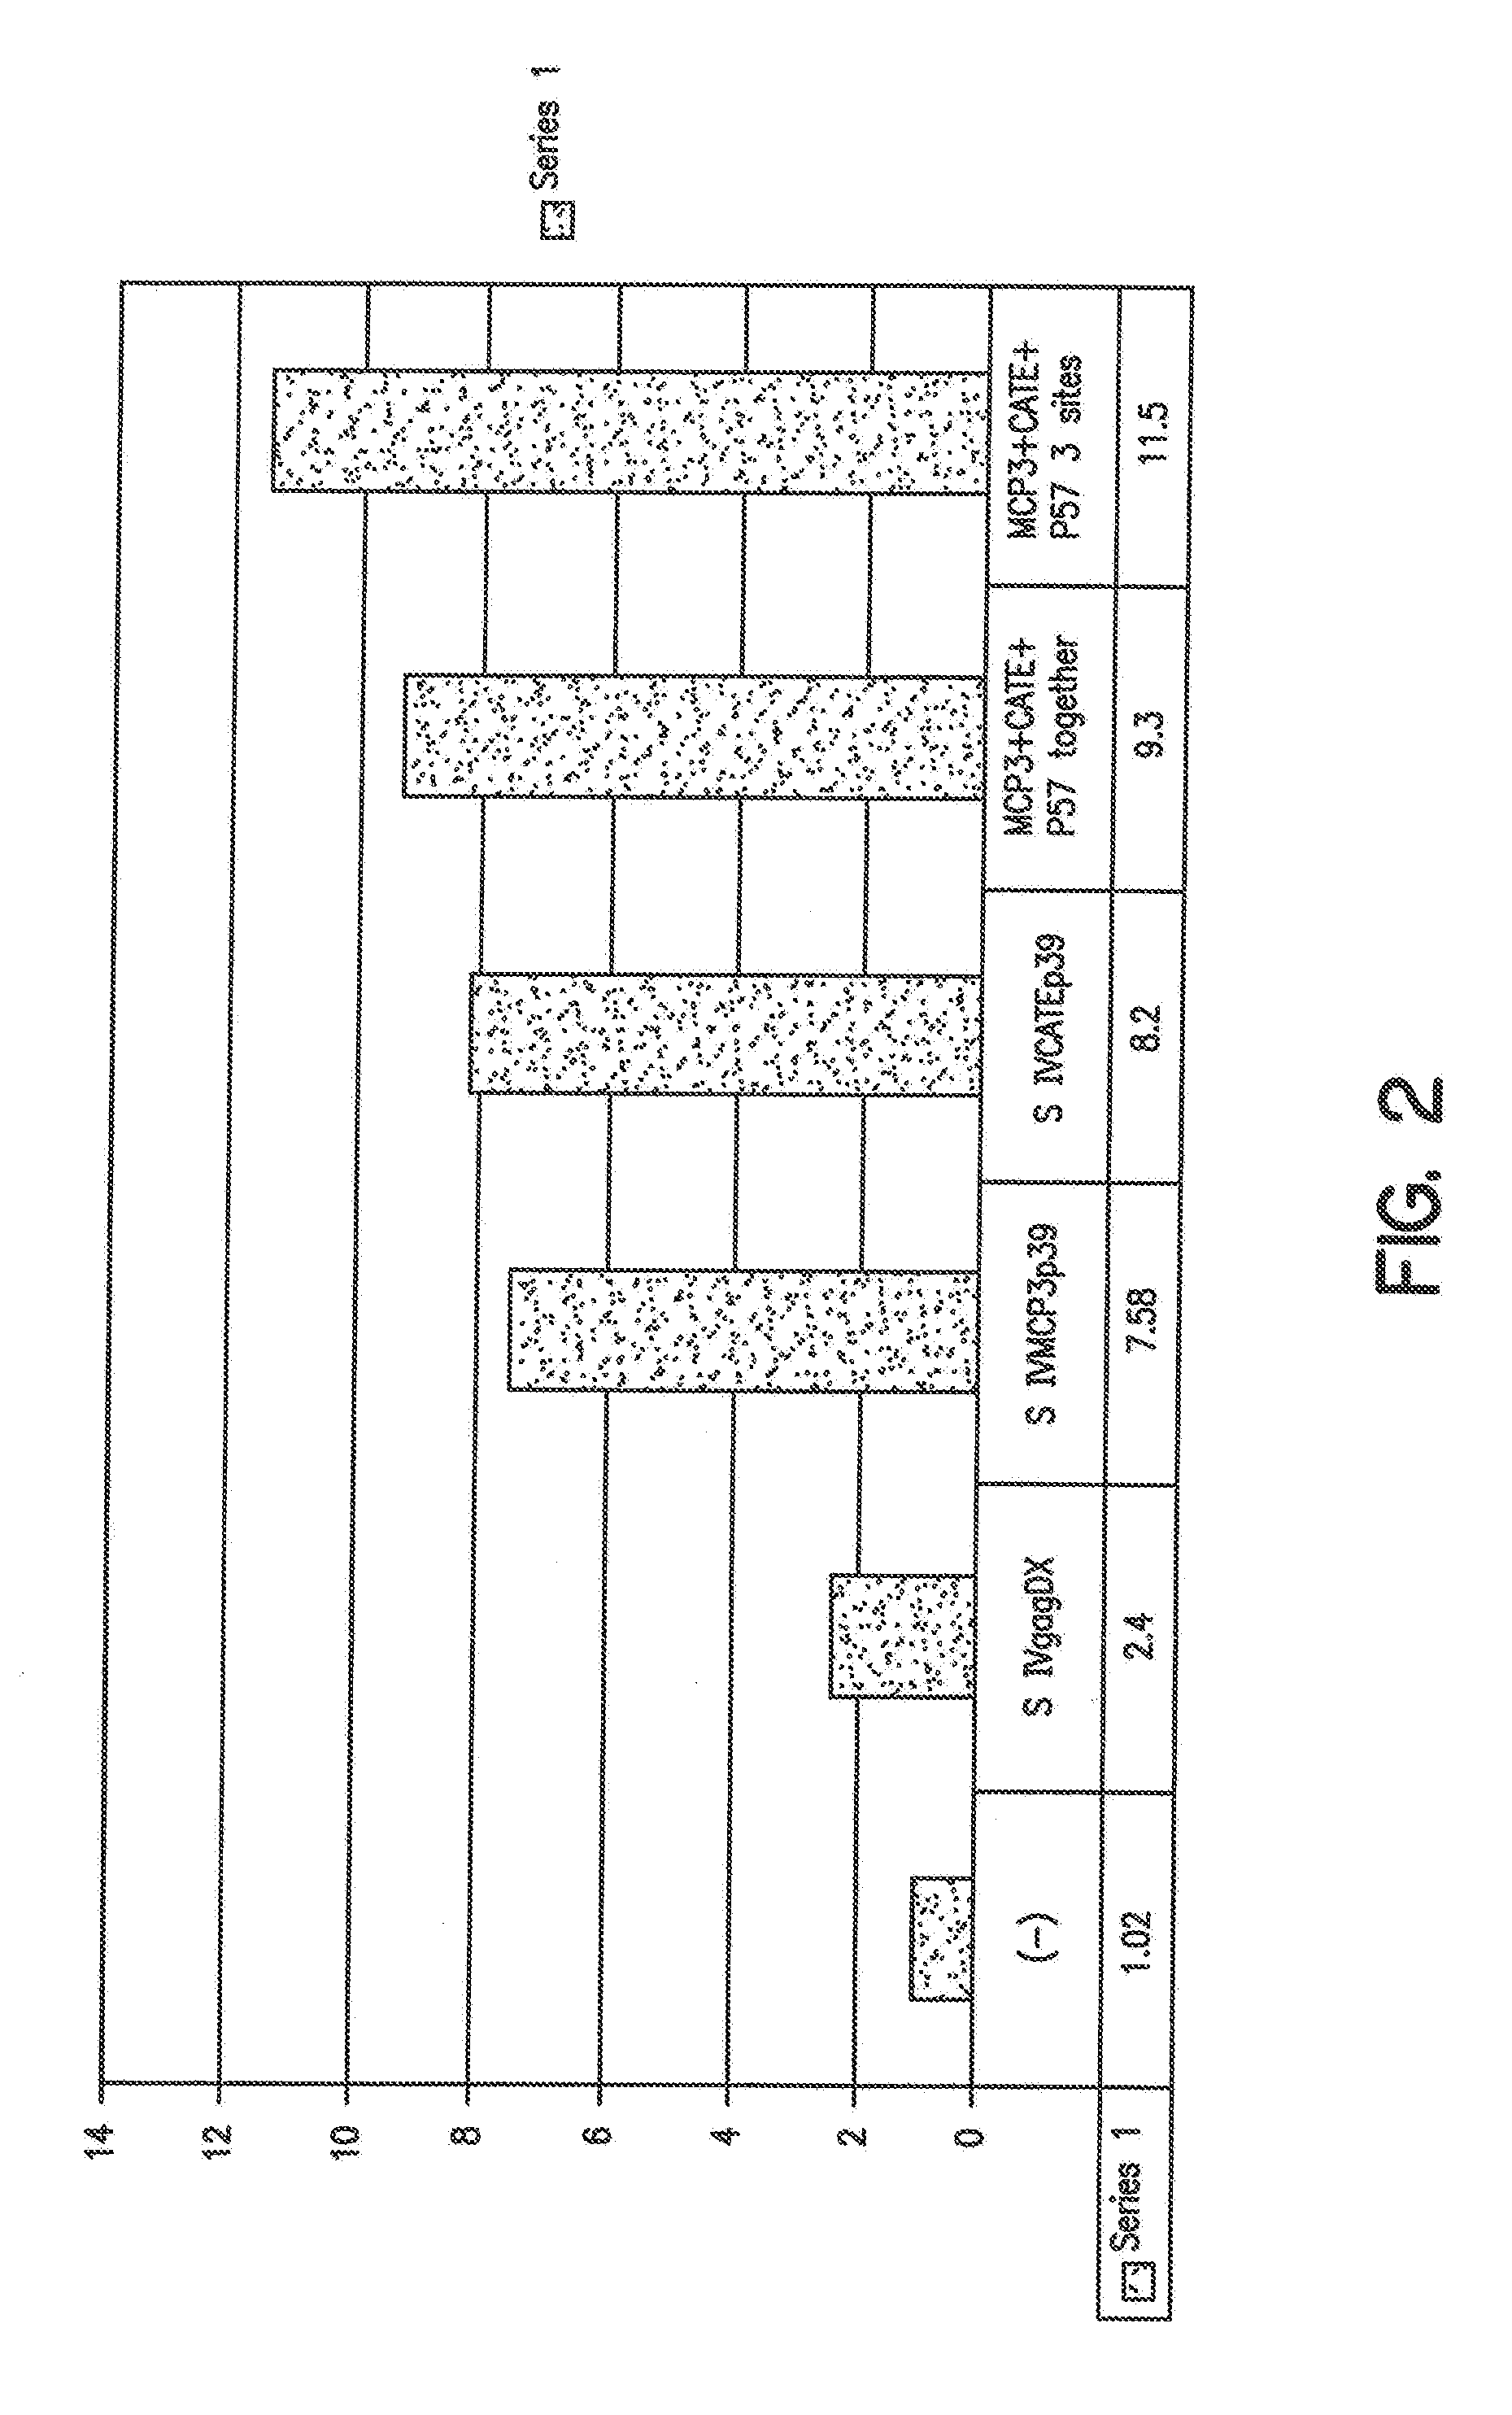 Expression vectors able to elicit improved immune response and methods of using same